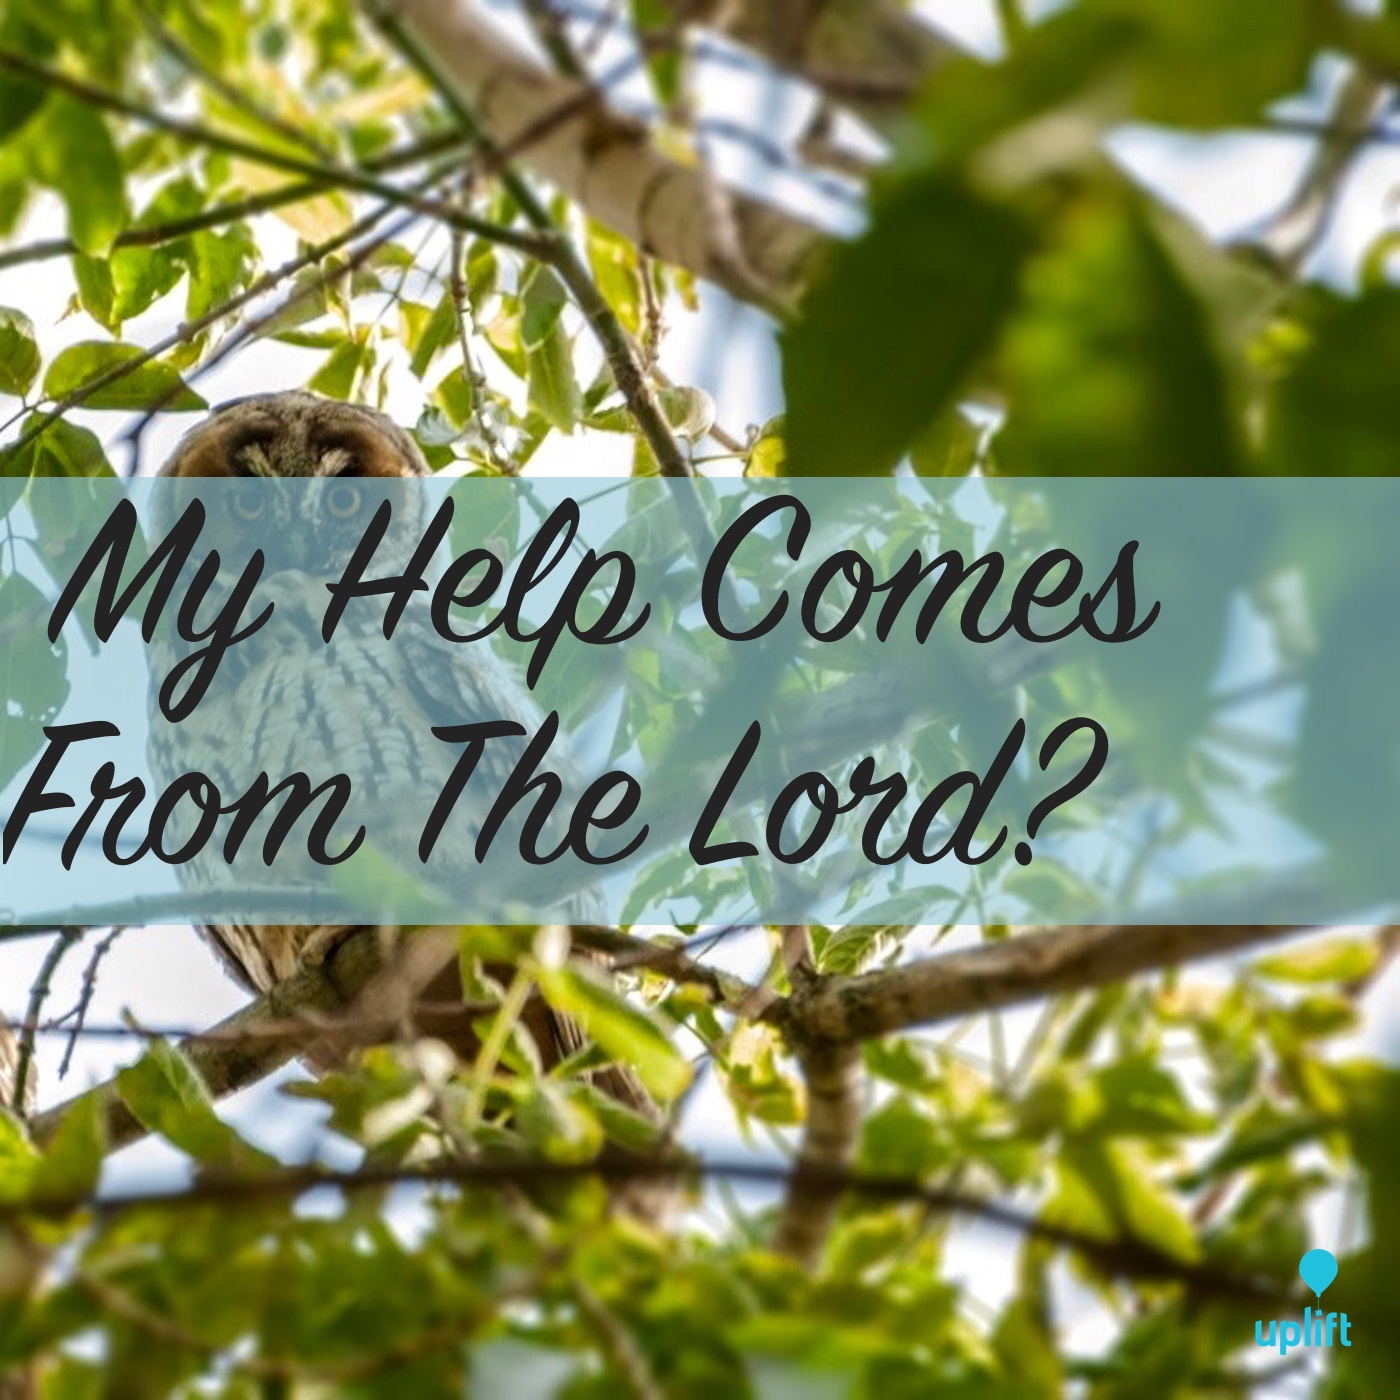 Episode 17: My Help Comes From The Lord?